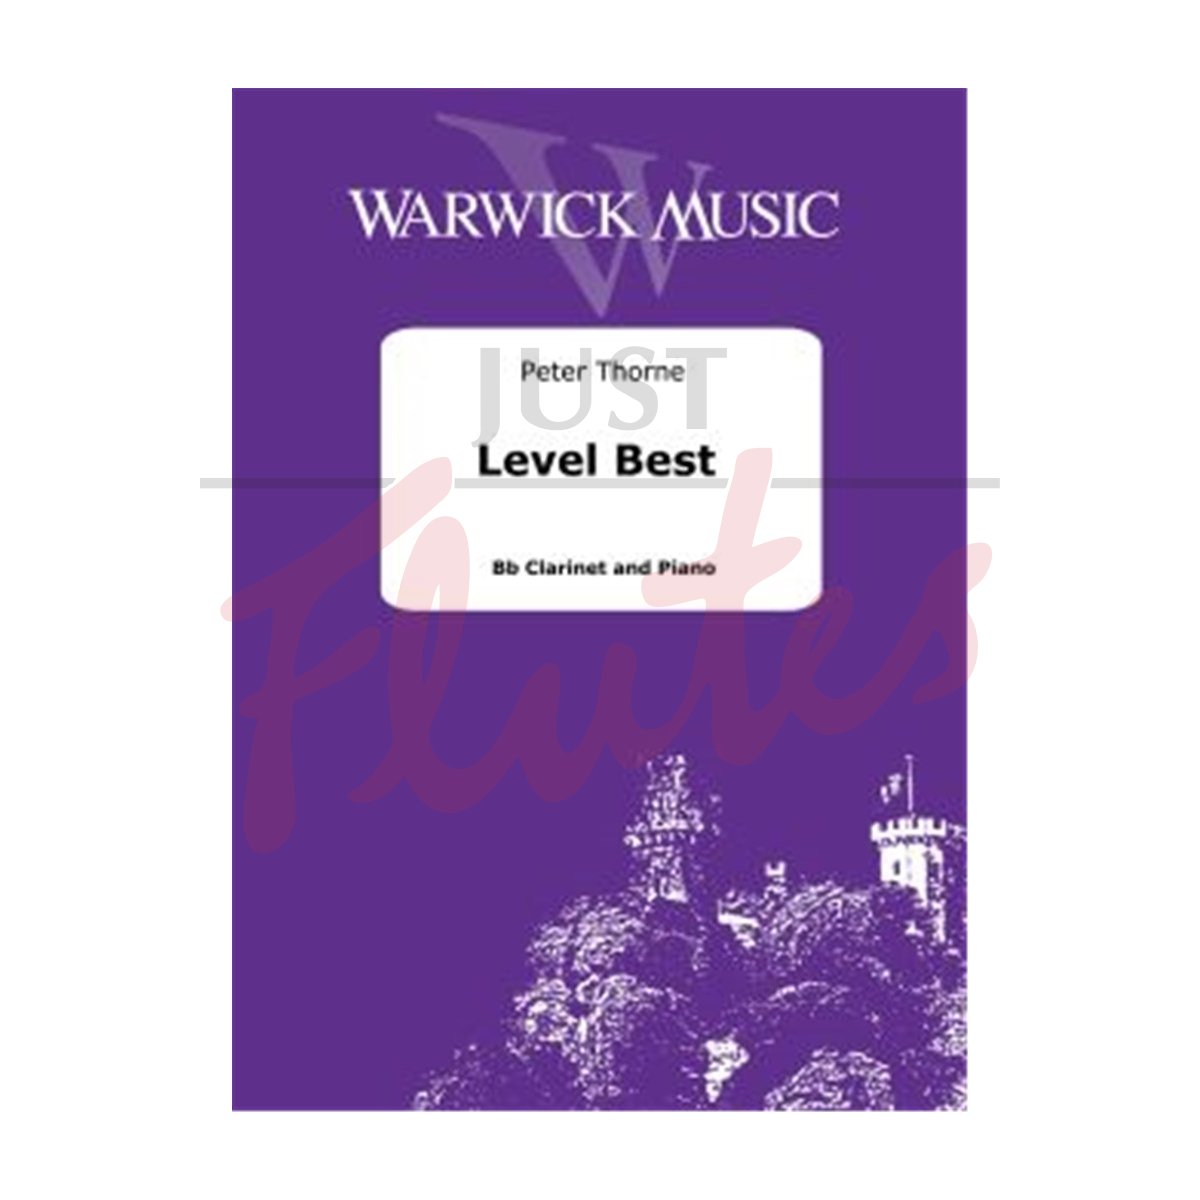 Level Best for Clarinet and Piano